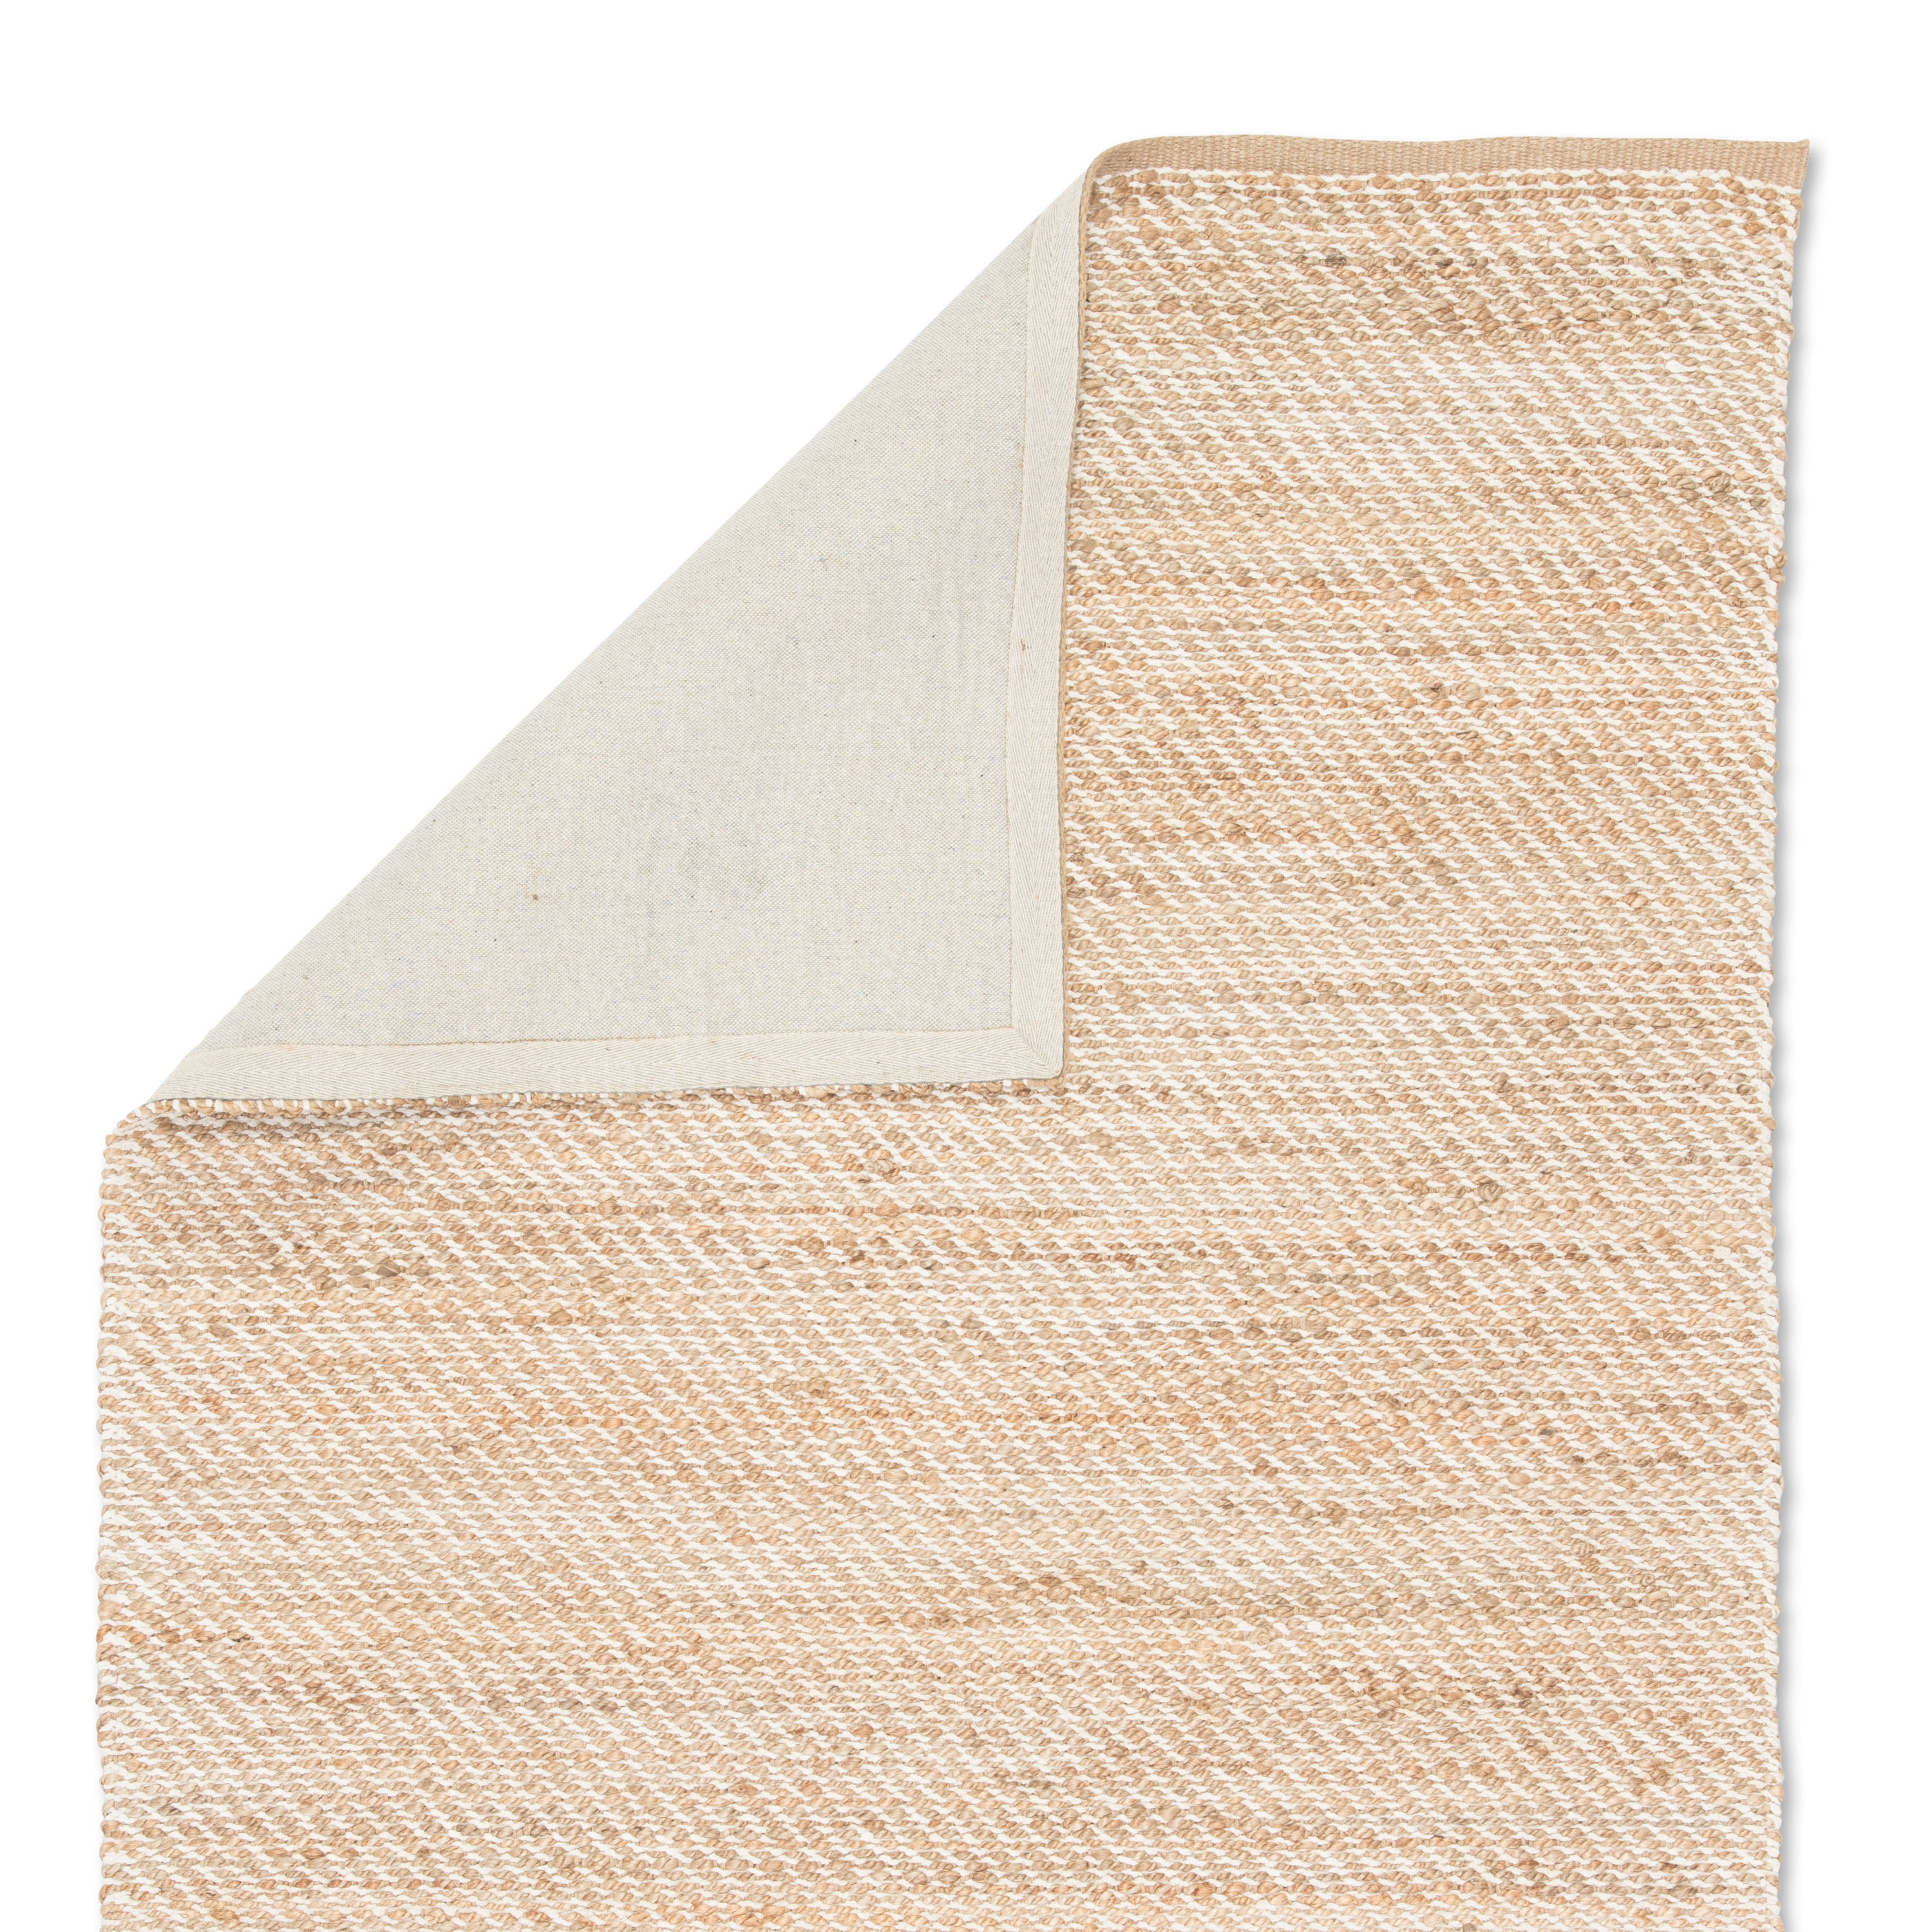 Diagonal Weave Natural Solid Beige/ White Area Rug (8' X 10') - Image 2